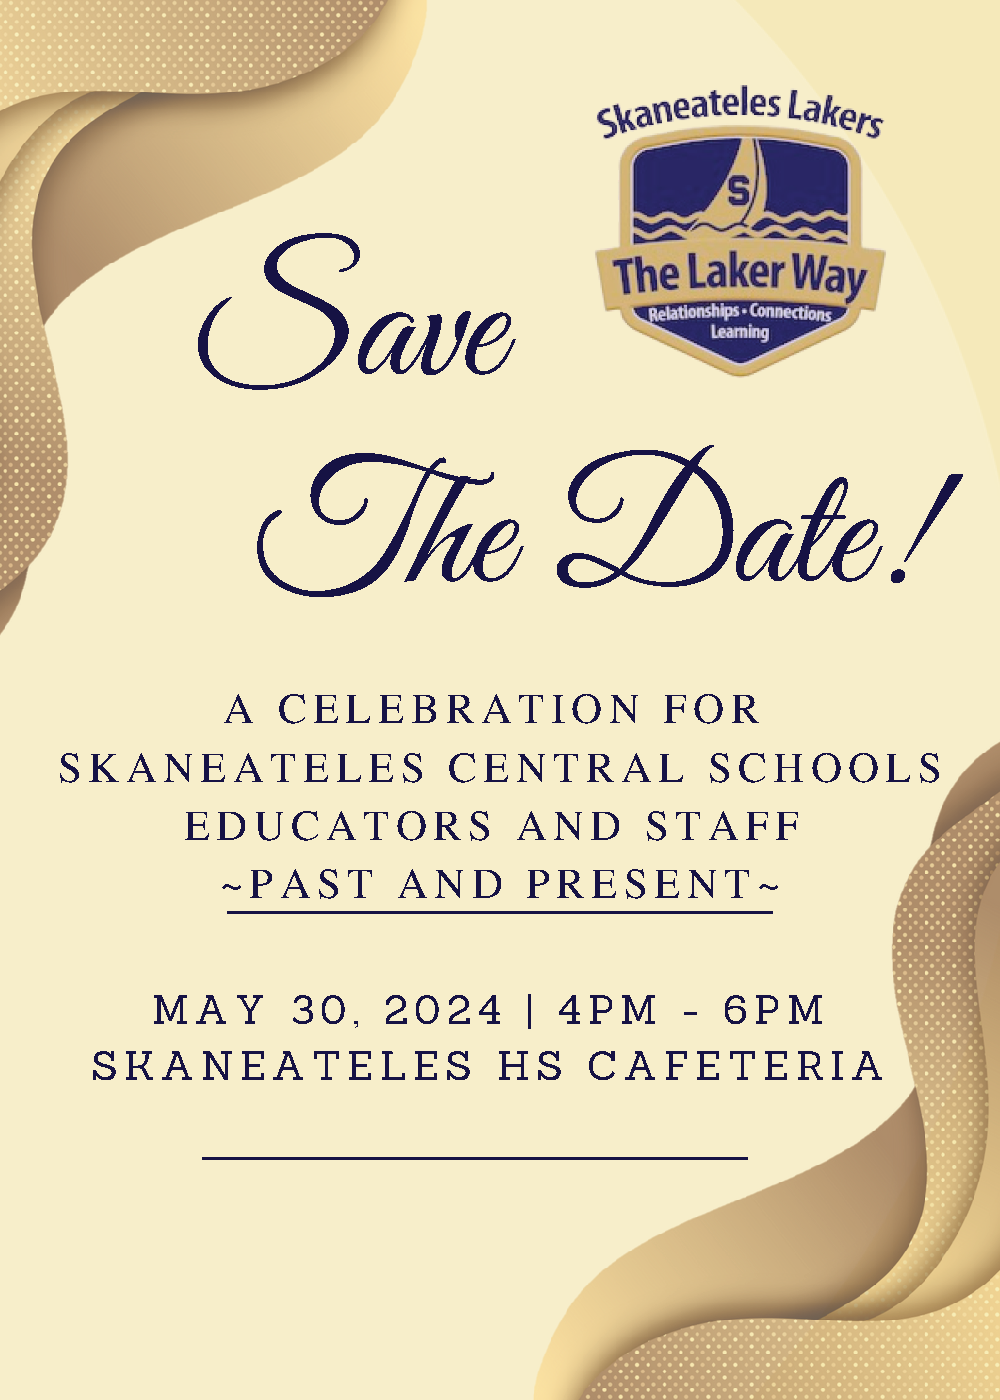 Save the DAte! A celebration for Skaneateles Central Schools Educators and Staff Past and Present. May 30, 2024| 4-6 p.m. Skaneateles HS Cafeteria